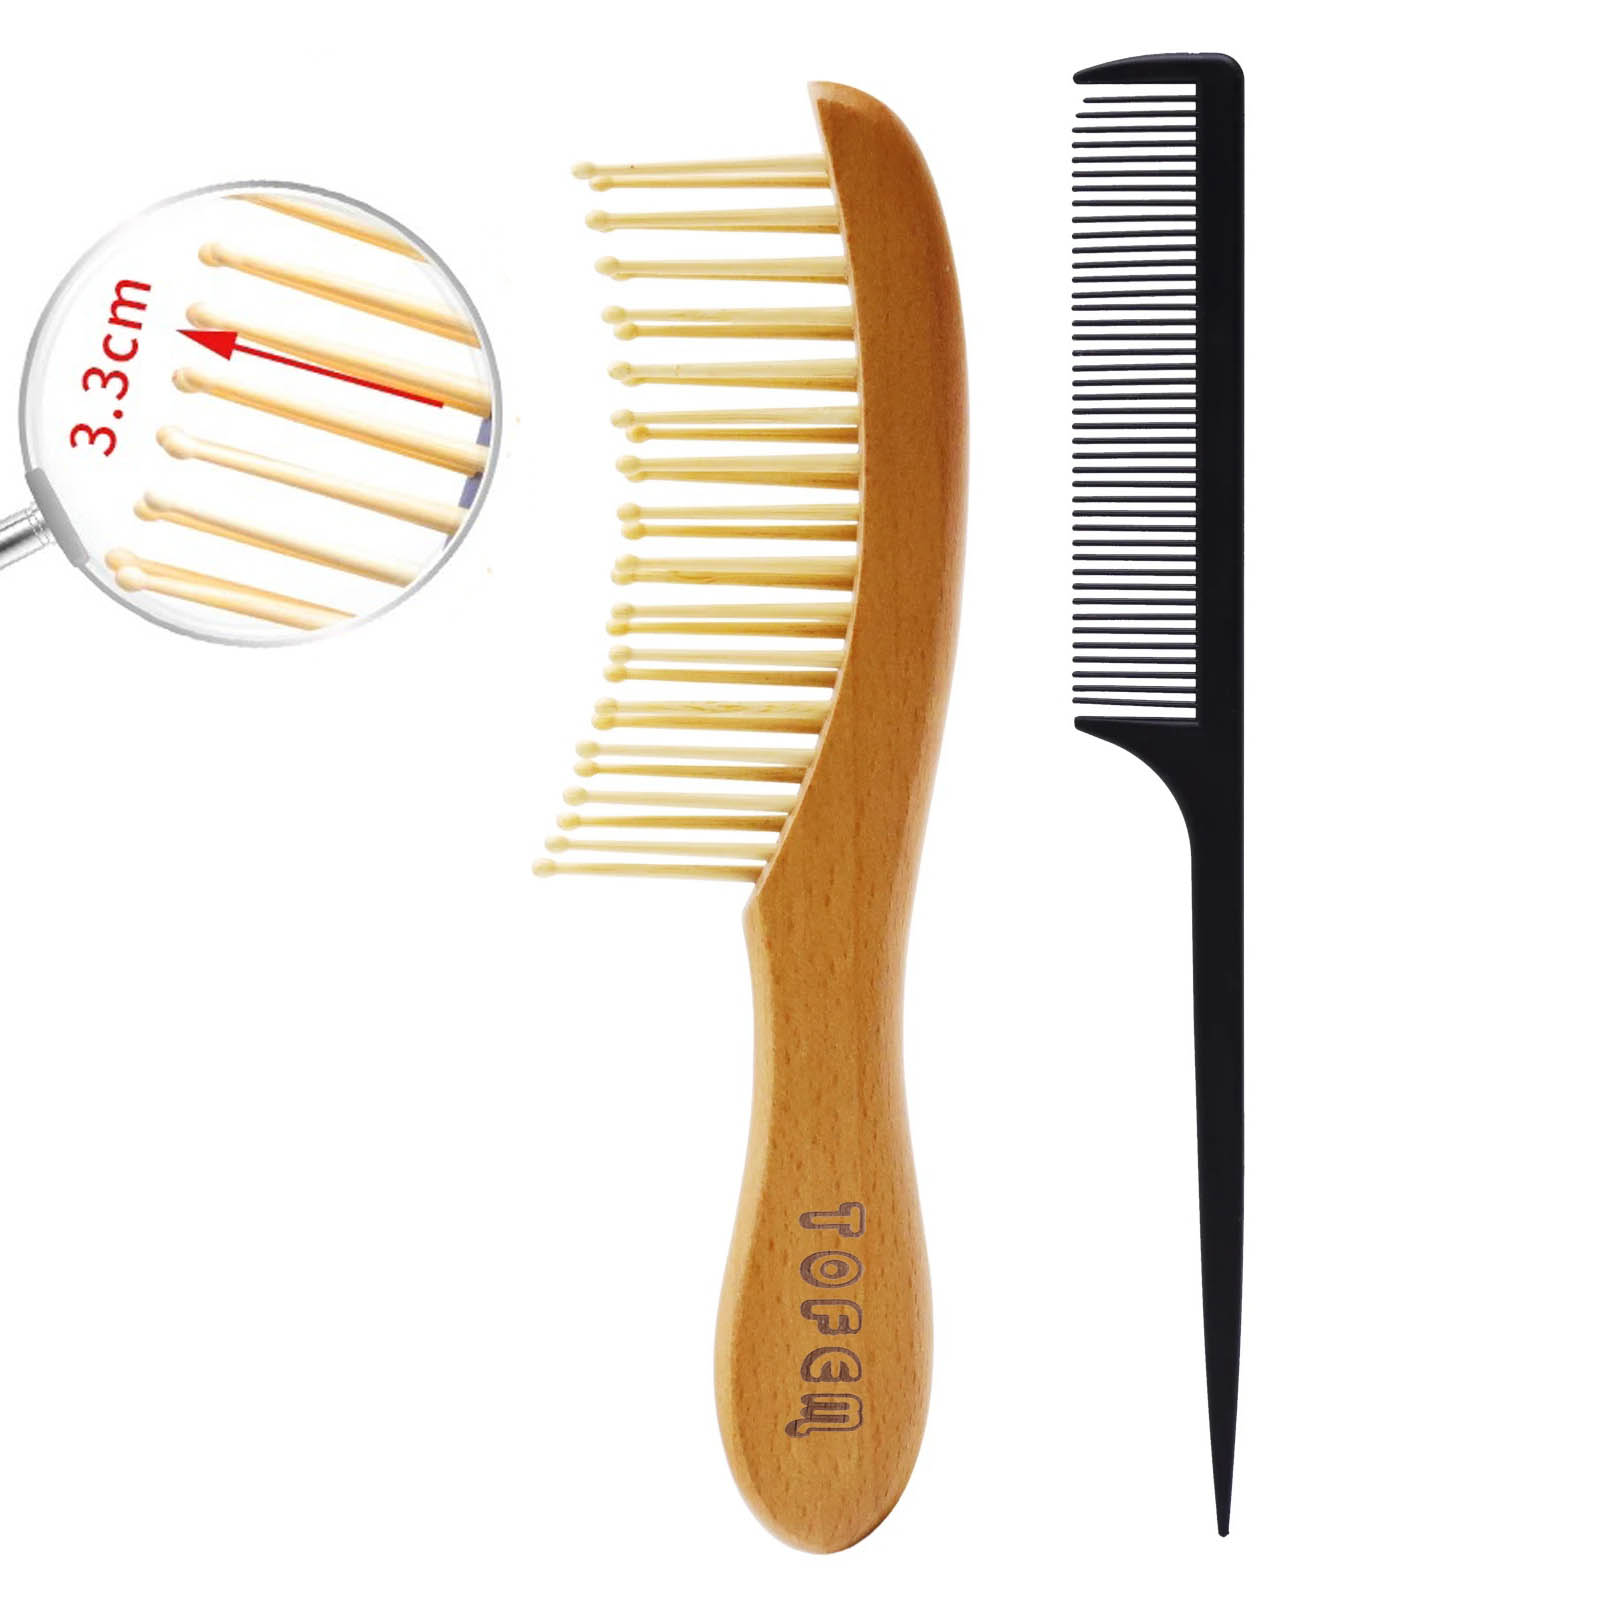 Wood Comb Wide Tooth specially designed wooden teeth work wonders